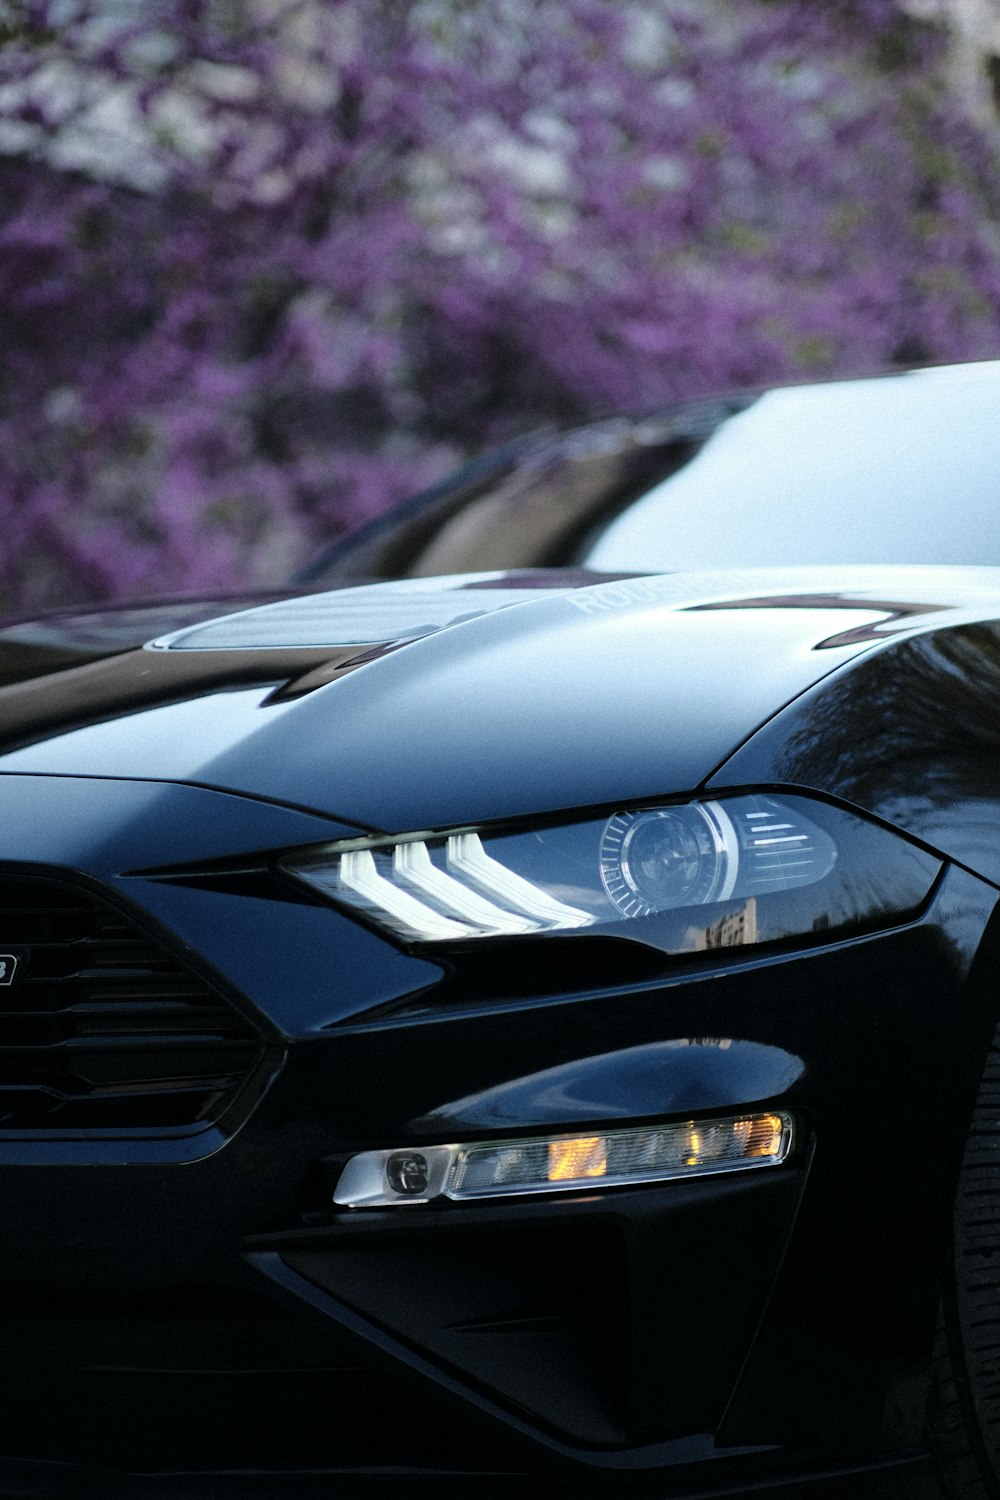 a close up of the front of a black car